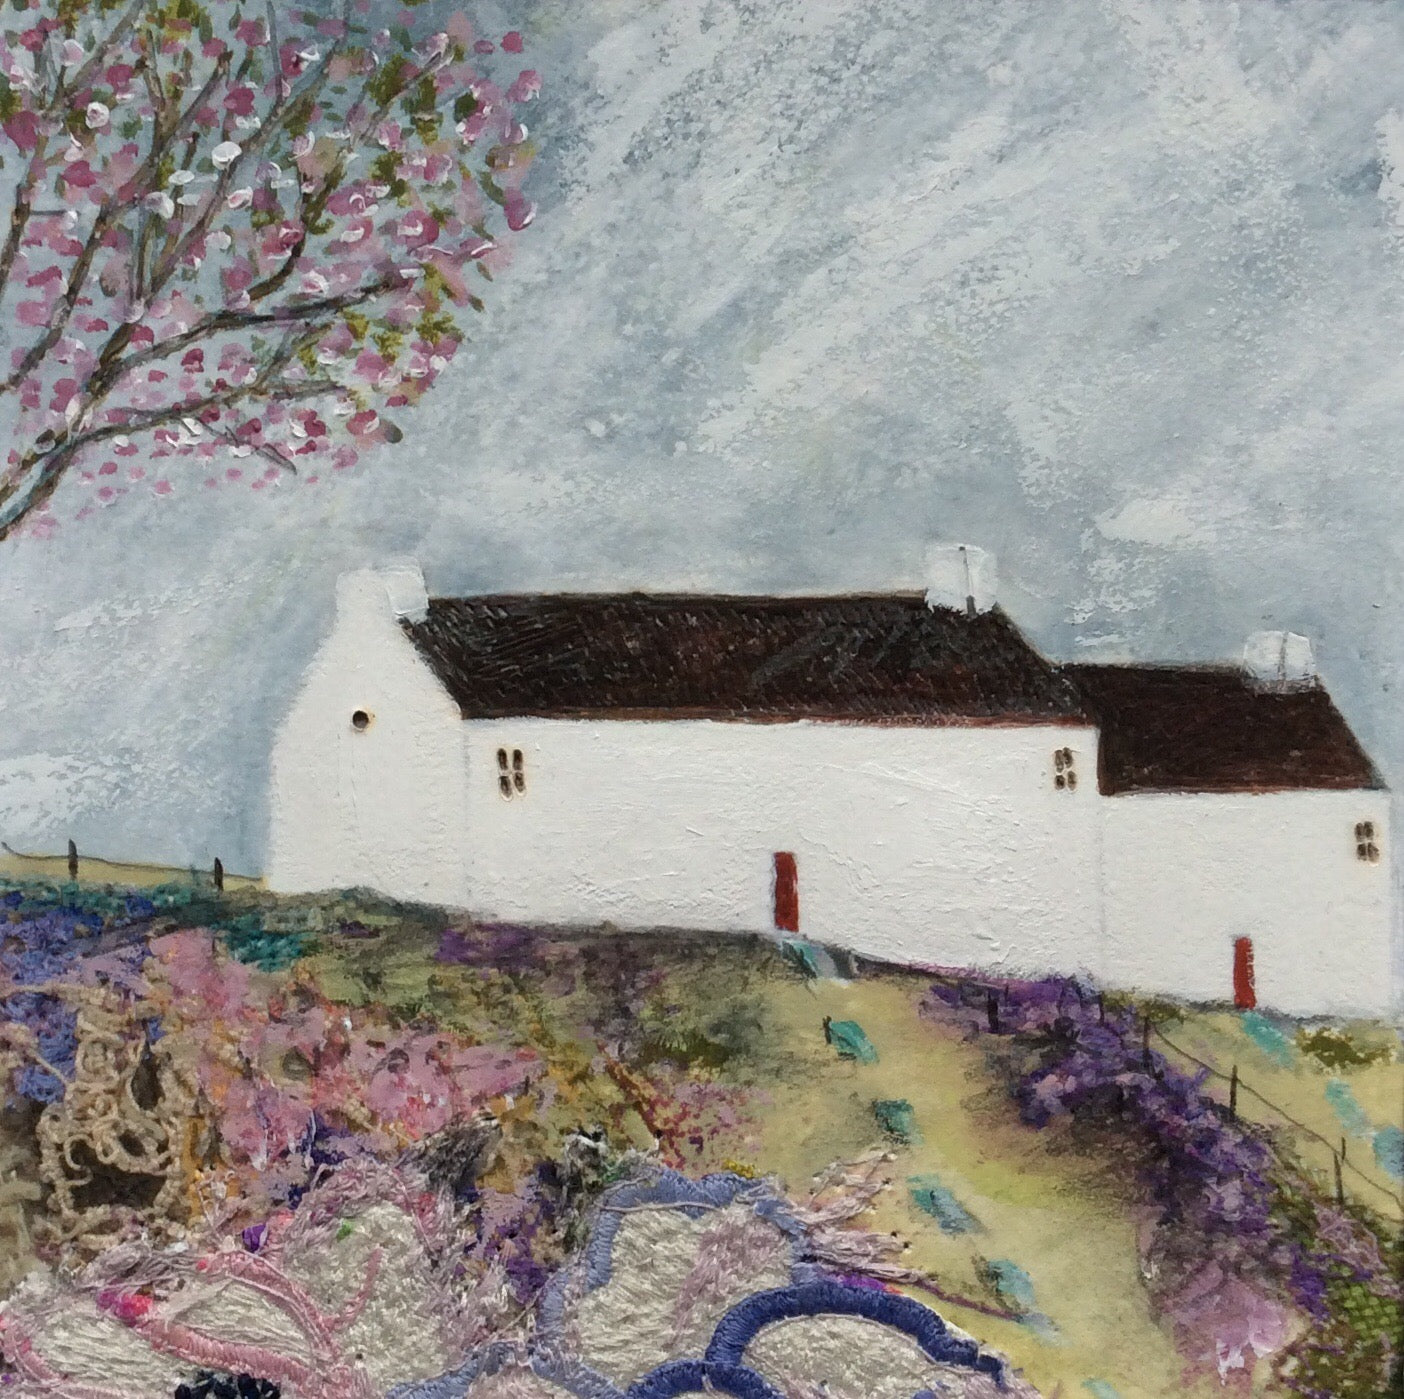 Mixed Media Art print work by Louise O'Hara "A calm summers day"